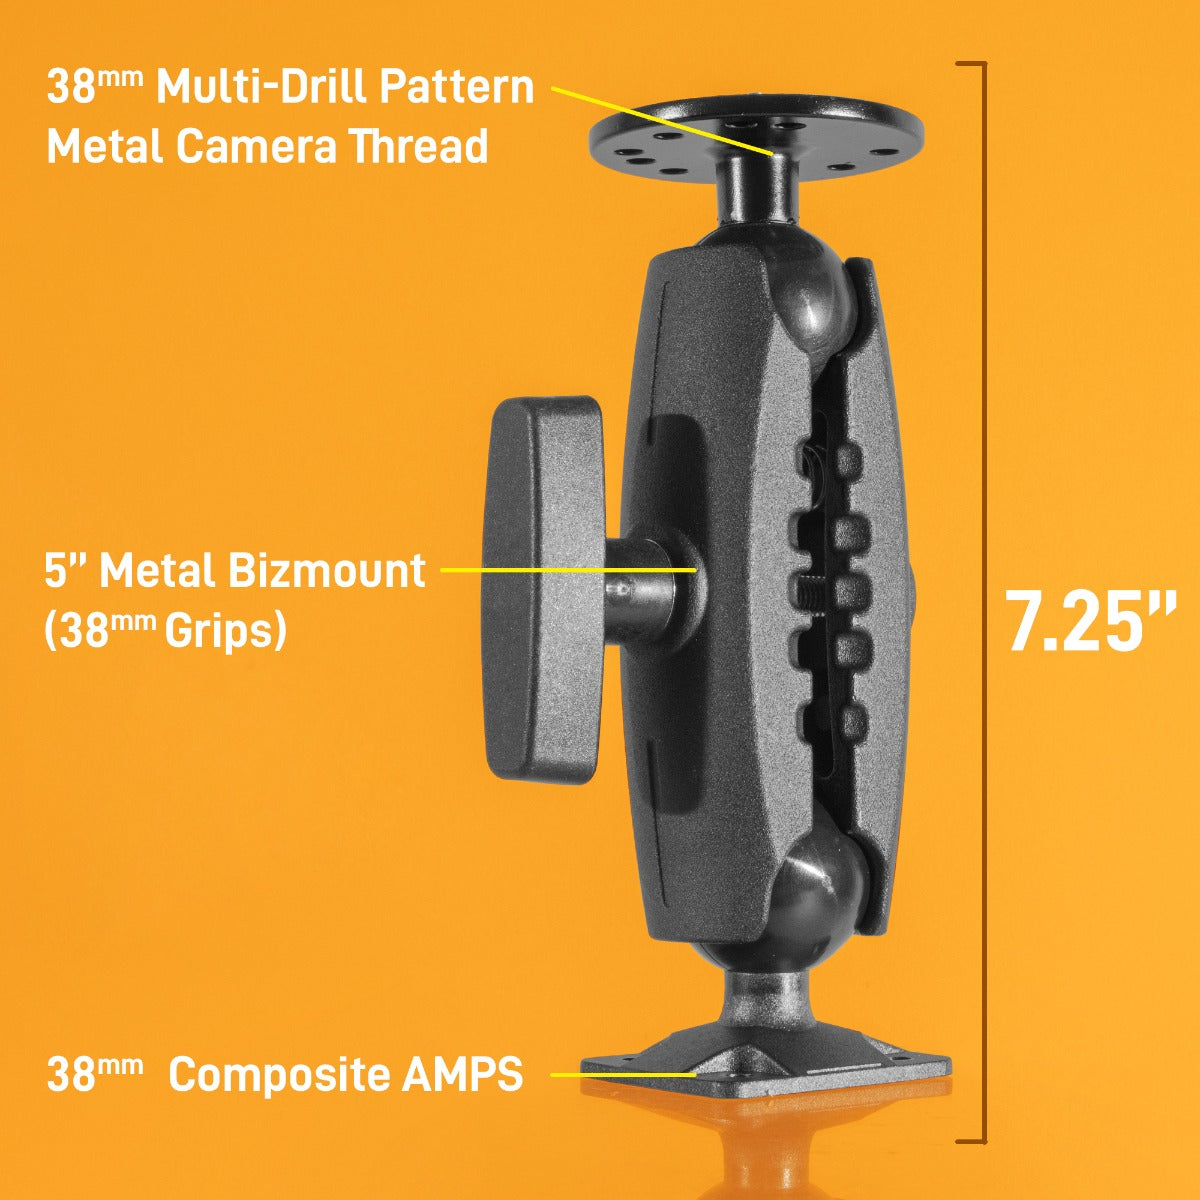 iBOLT™ 38mm / 1.5 inch Composite AMPS to ¼ 20” Metal Camera Screw Mount